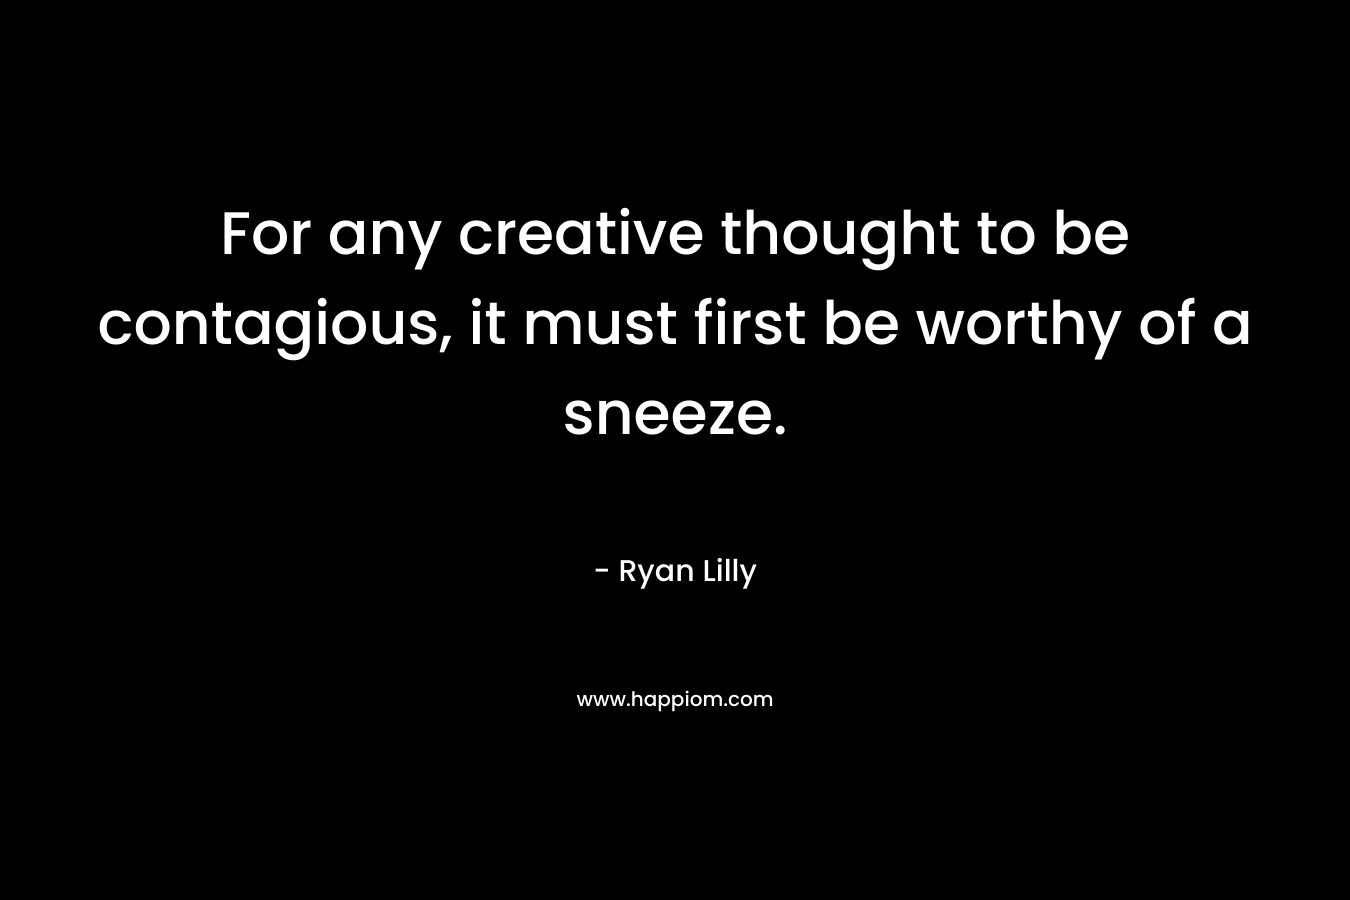 For any creative thought to be contagious, it must first be worthy of a sneeze. – Ryan Lilly